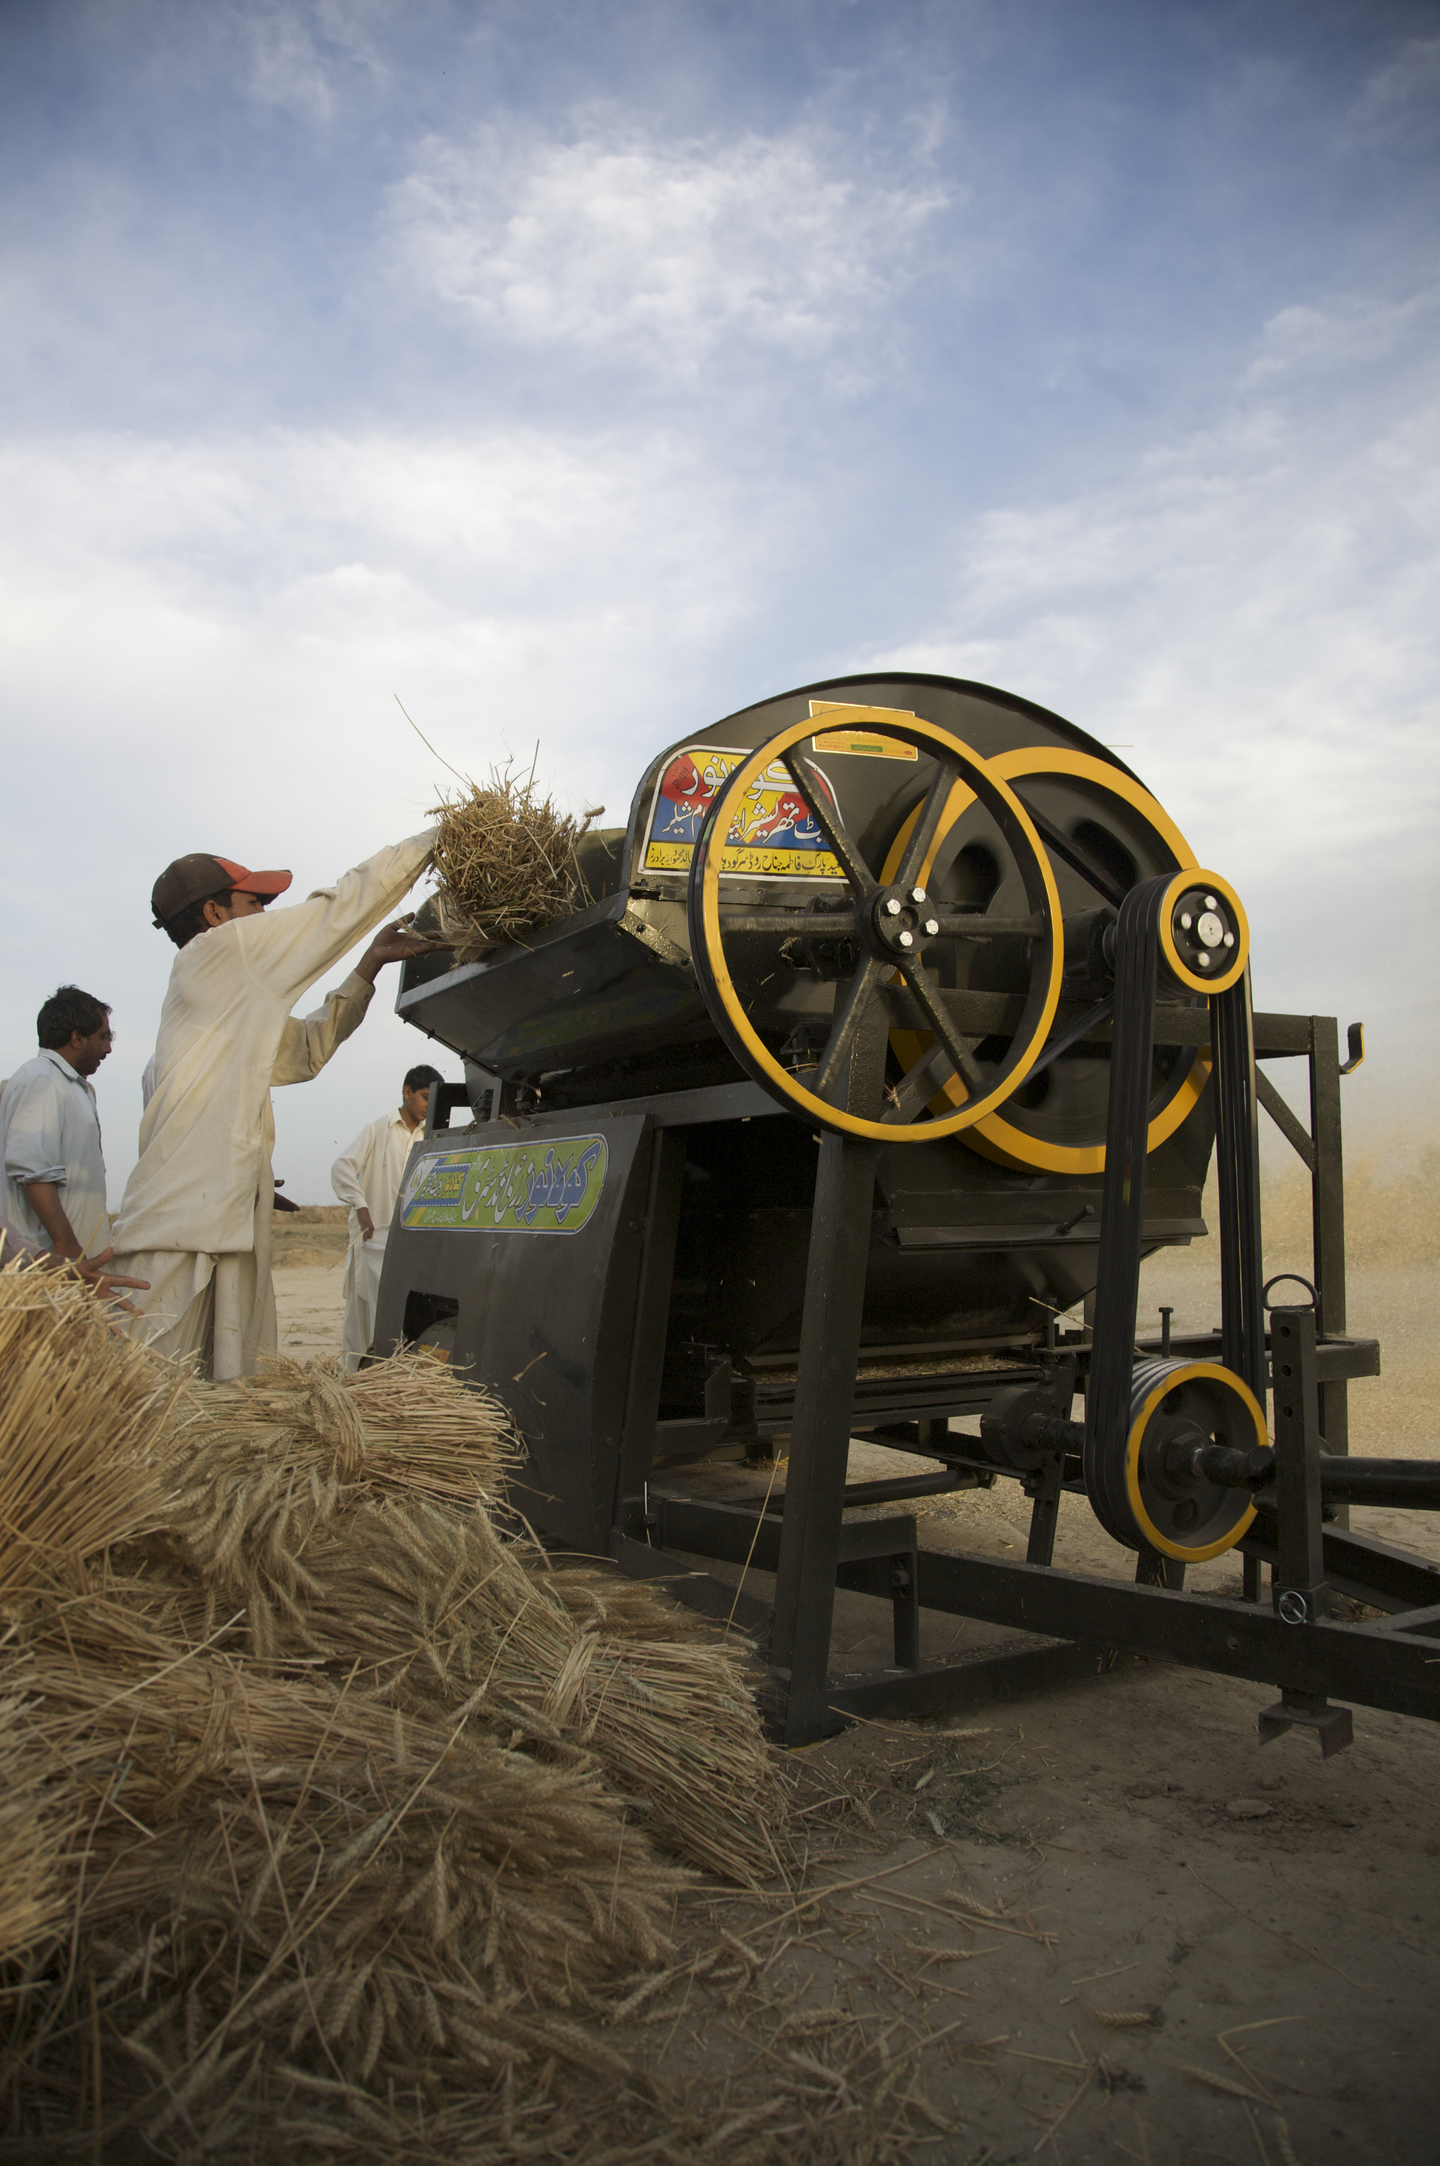 A man loads wheat into a machine sitting in the middle of a field on a clear day.